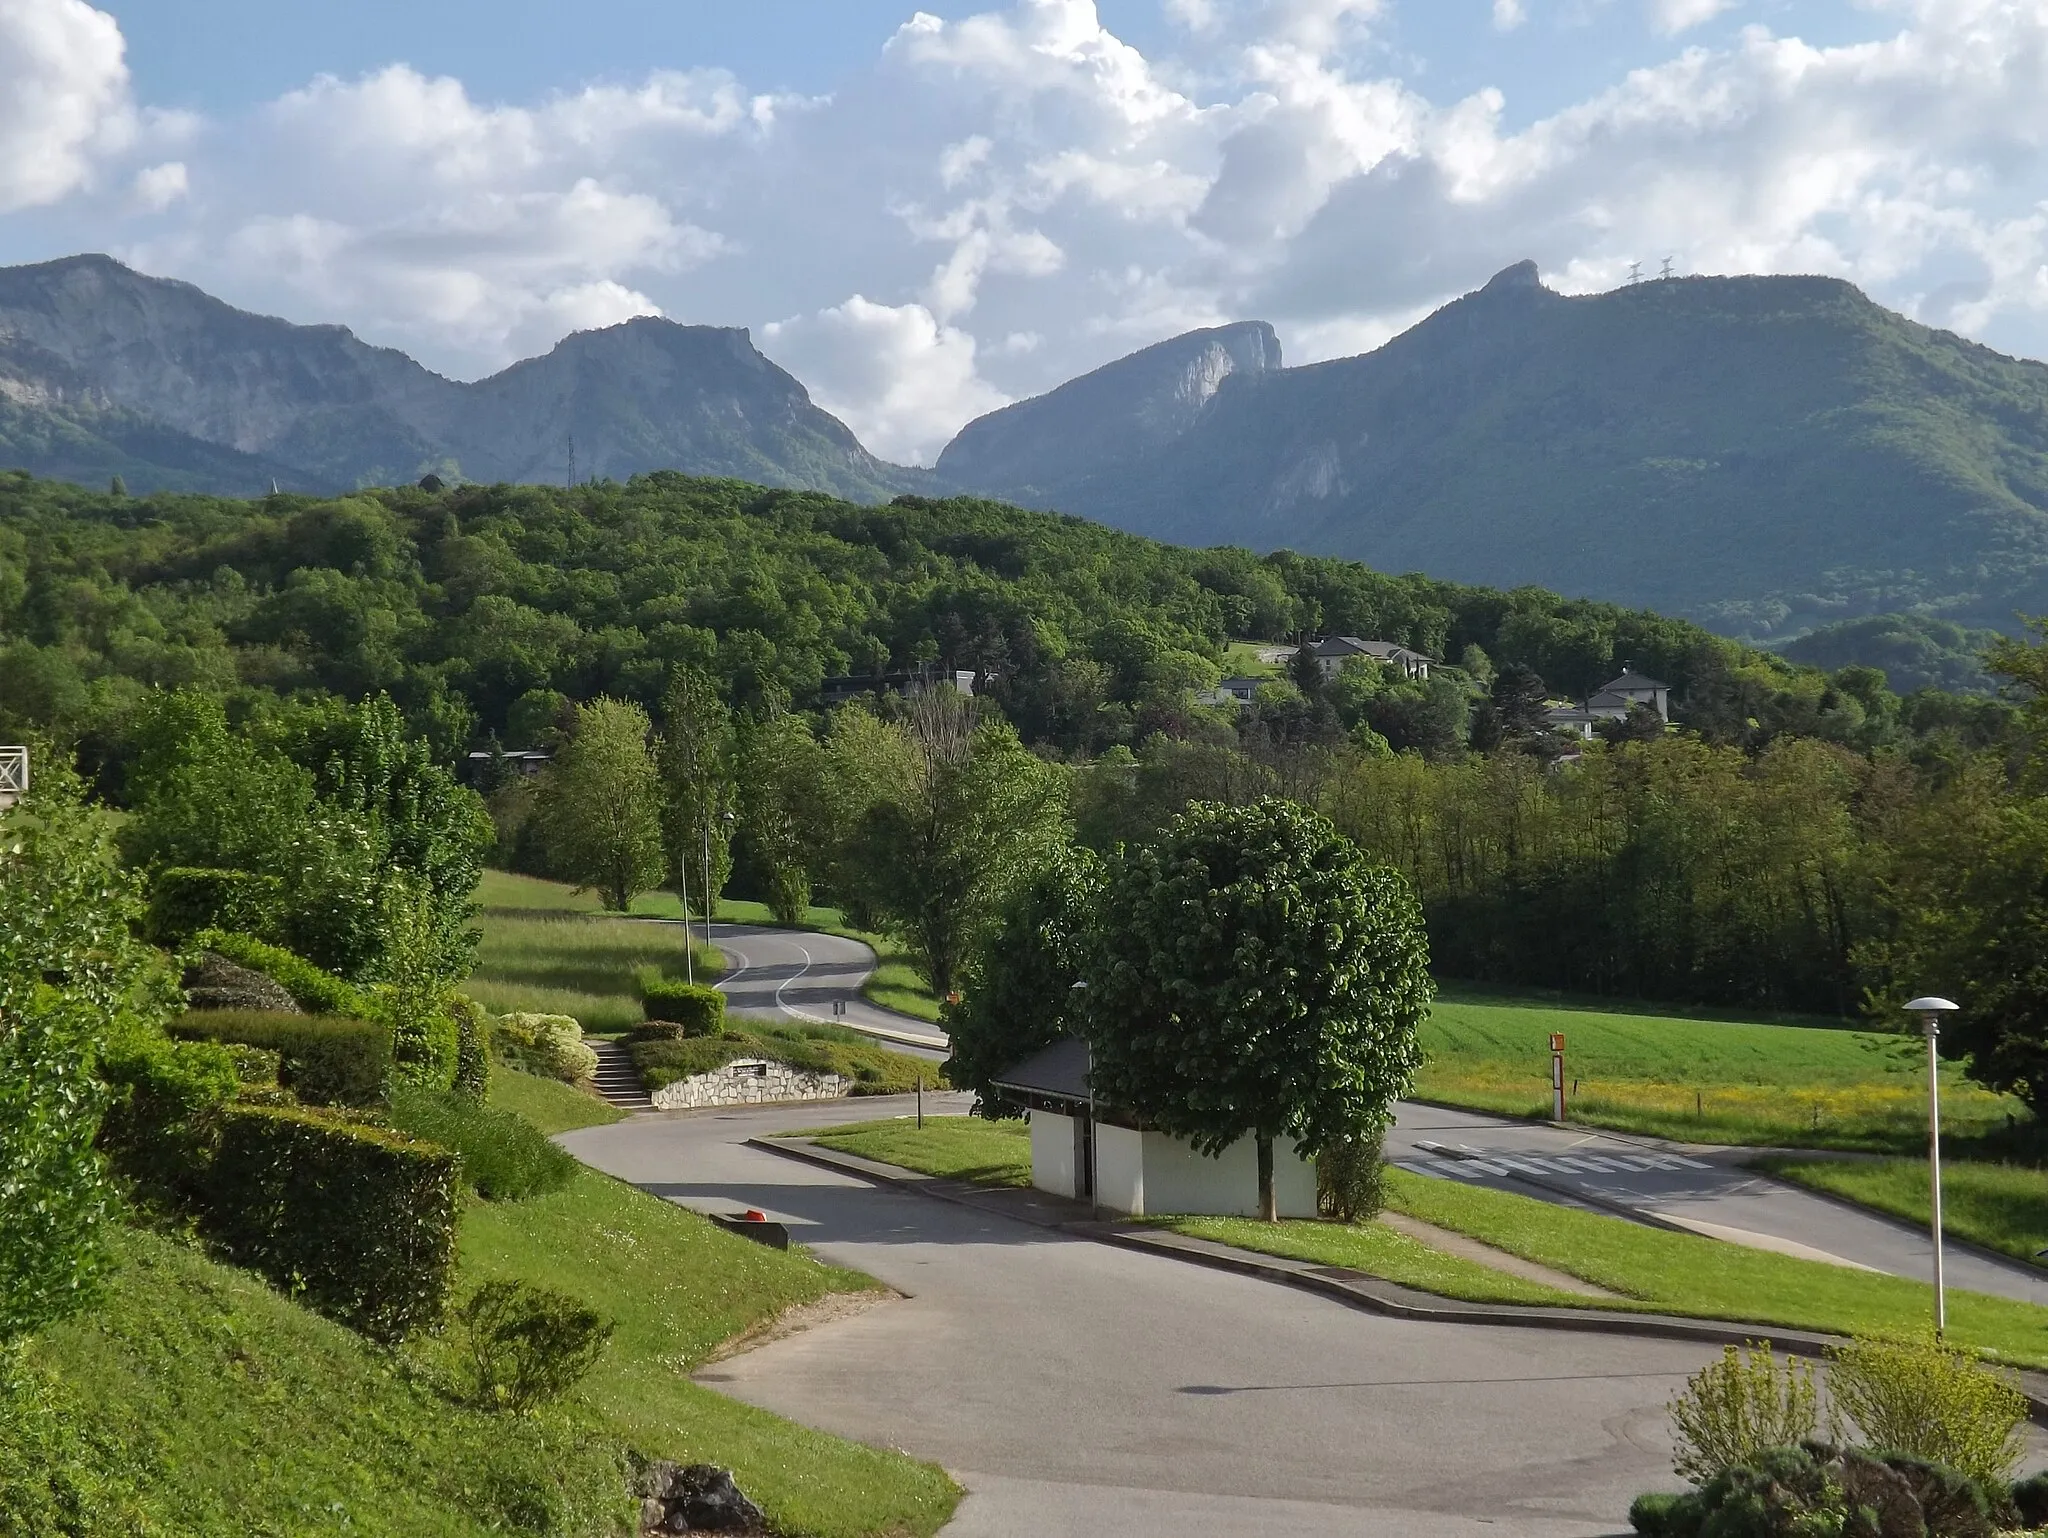 Photo showing: Residential area of Jacob-Bellecombette (close to the city of Chambéry in Savoie, France) with the massif de la Chartreuse mountains at the background.